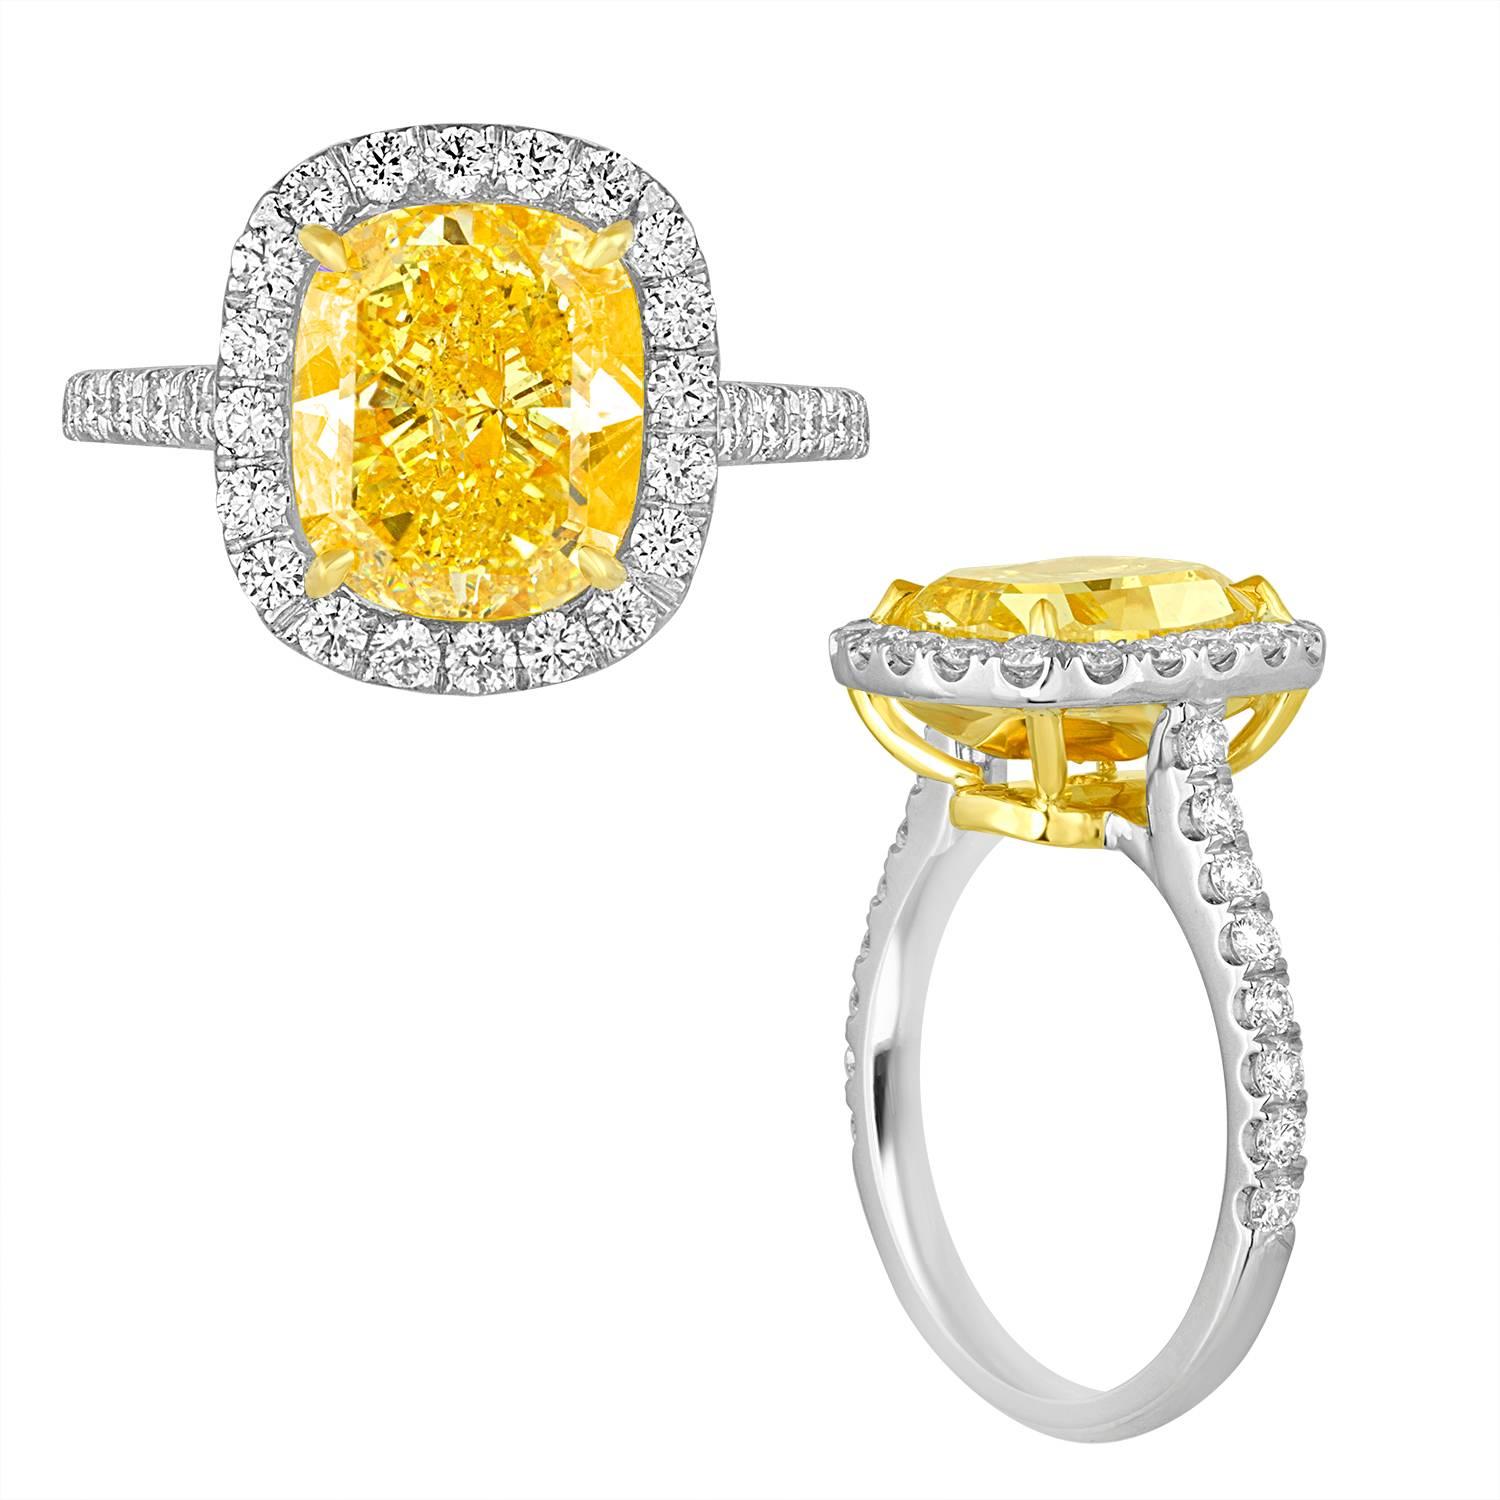 Contemporary 4.76 Carat Cushion GIA Certified Fancy Vivid Yellow Diamond Two Color Gold Ring For Sale